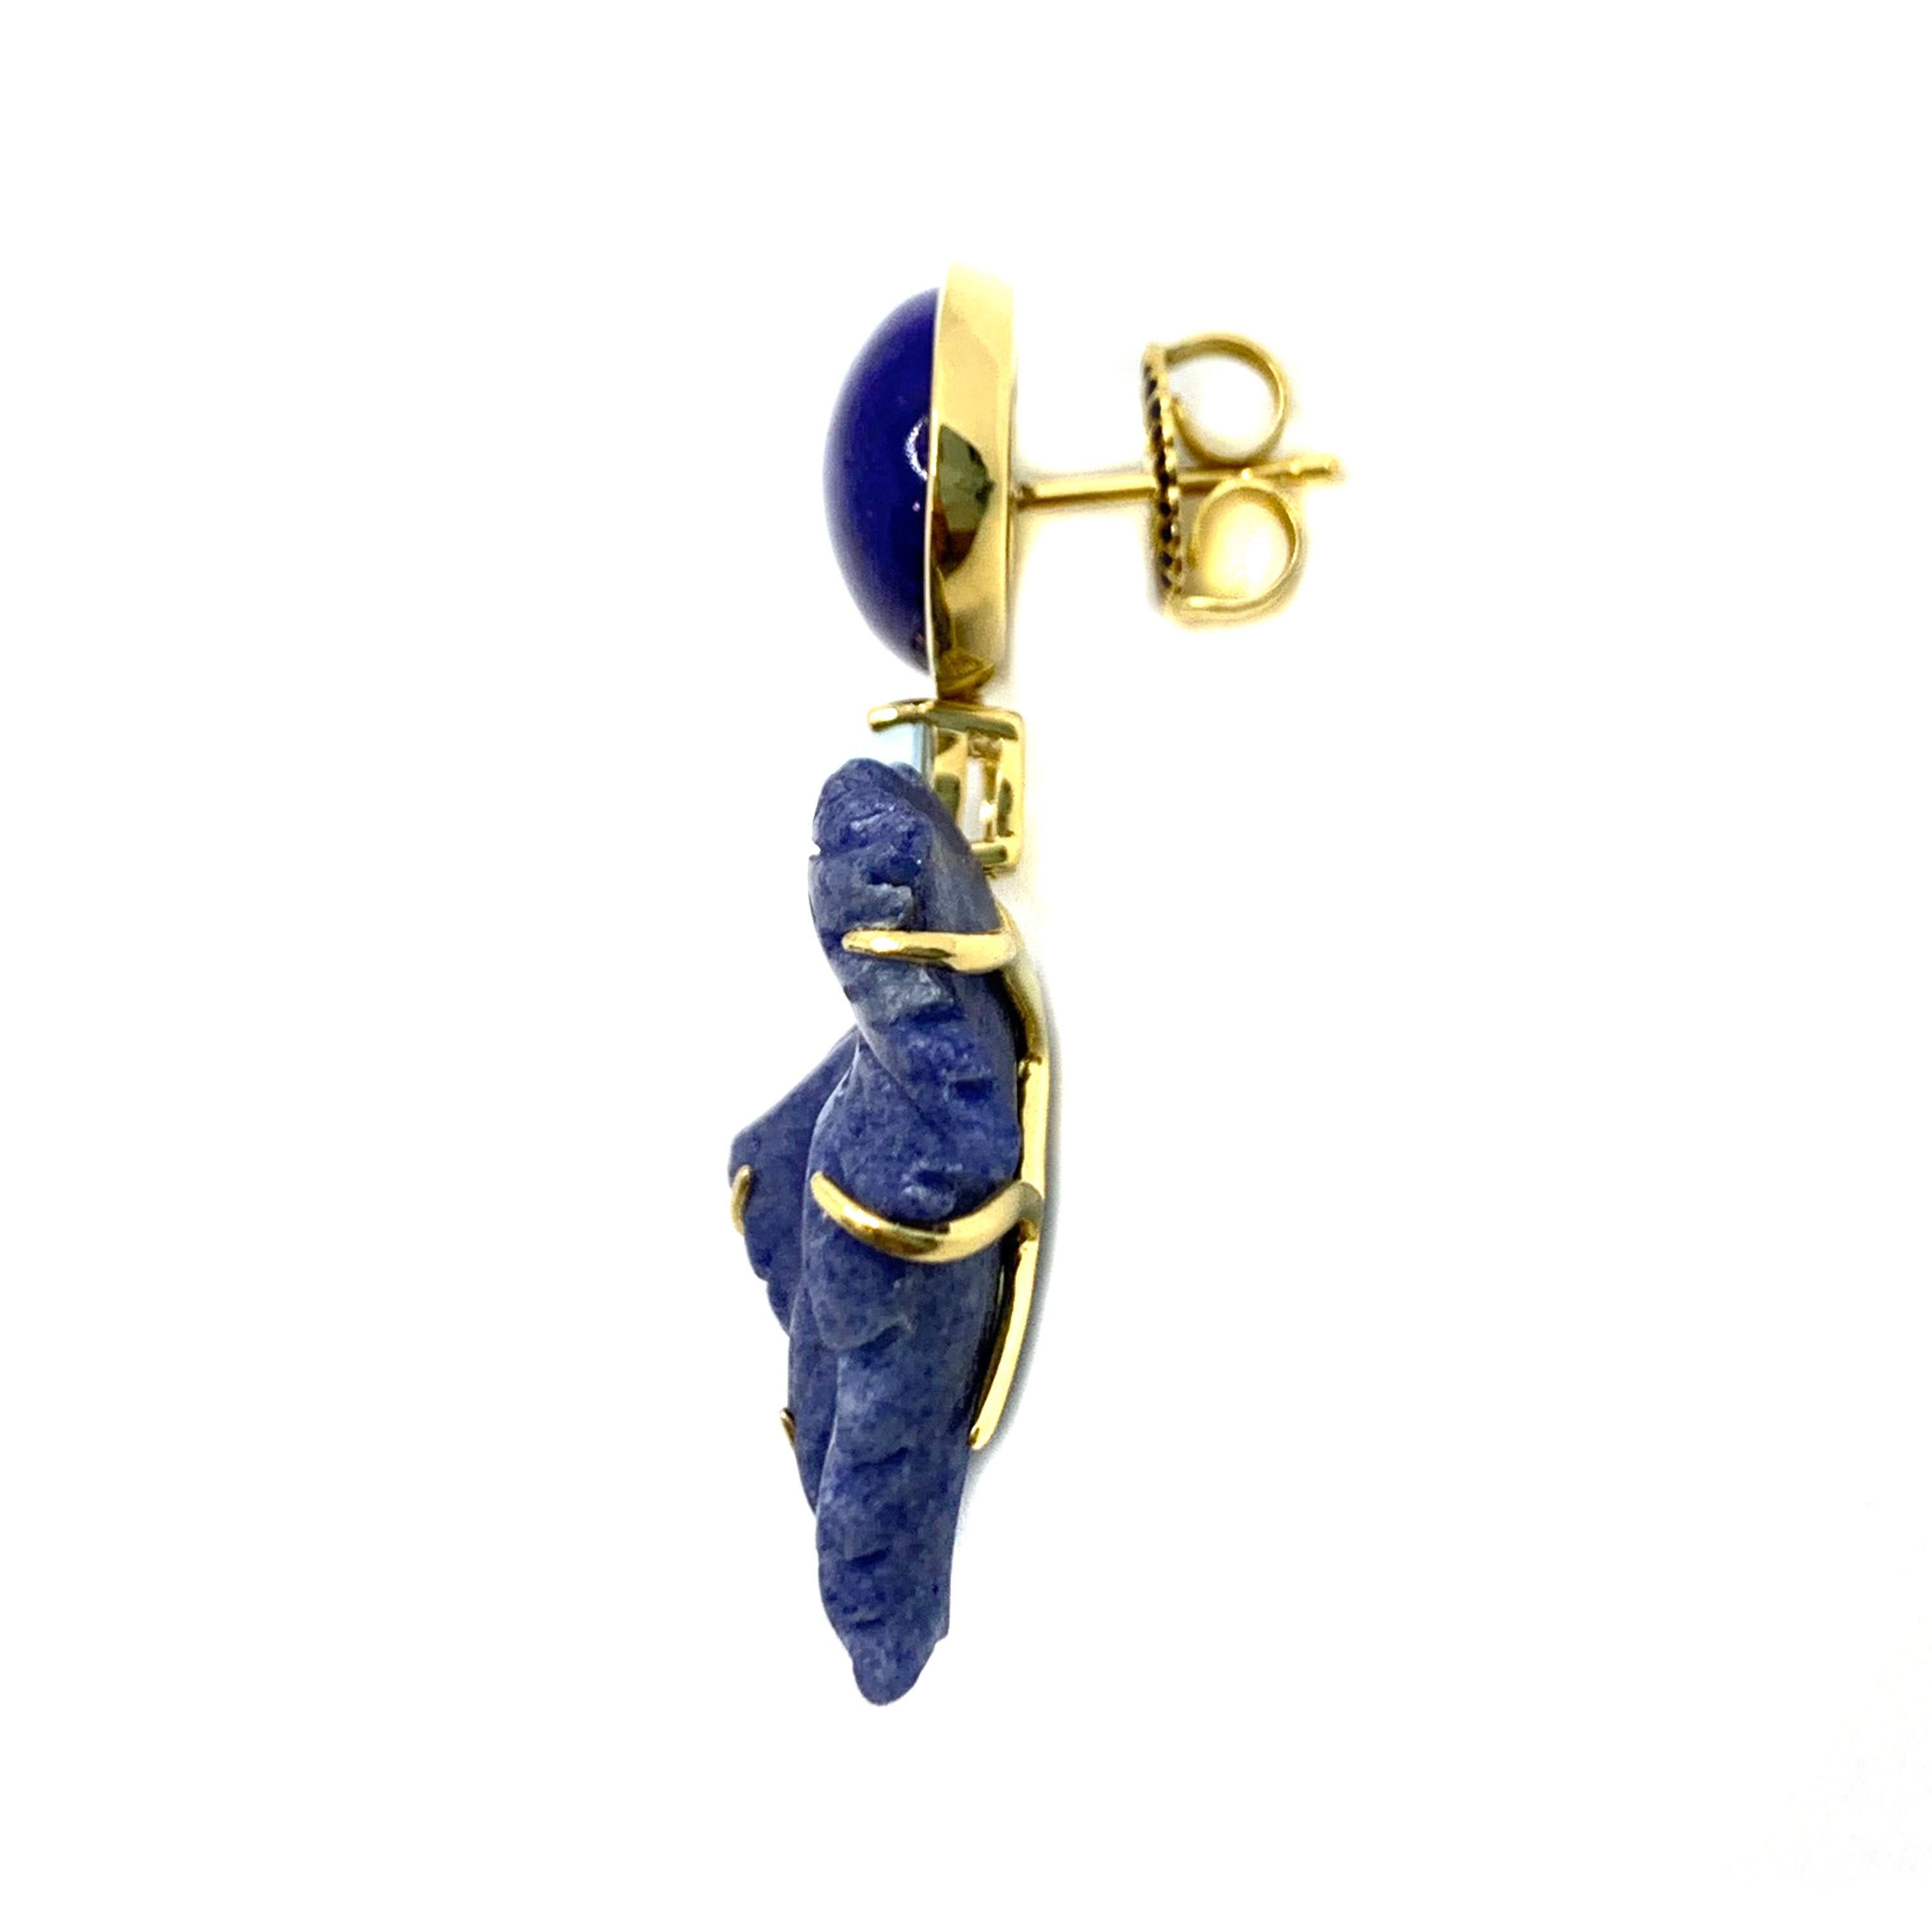 Artisan Stunning Cabochon Lapis Lazuli and Carved Blue Dumortierite Leaf Drop Earrings